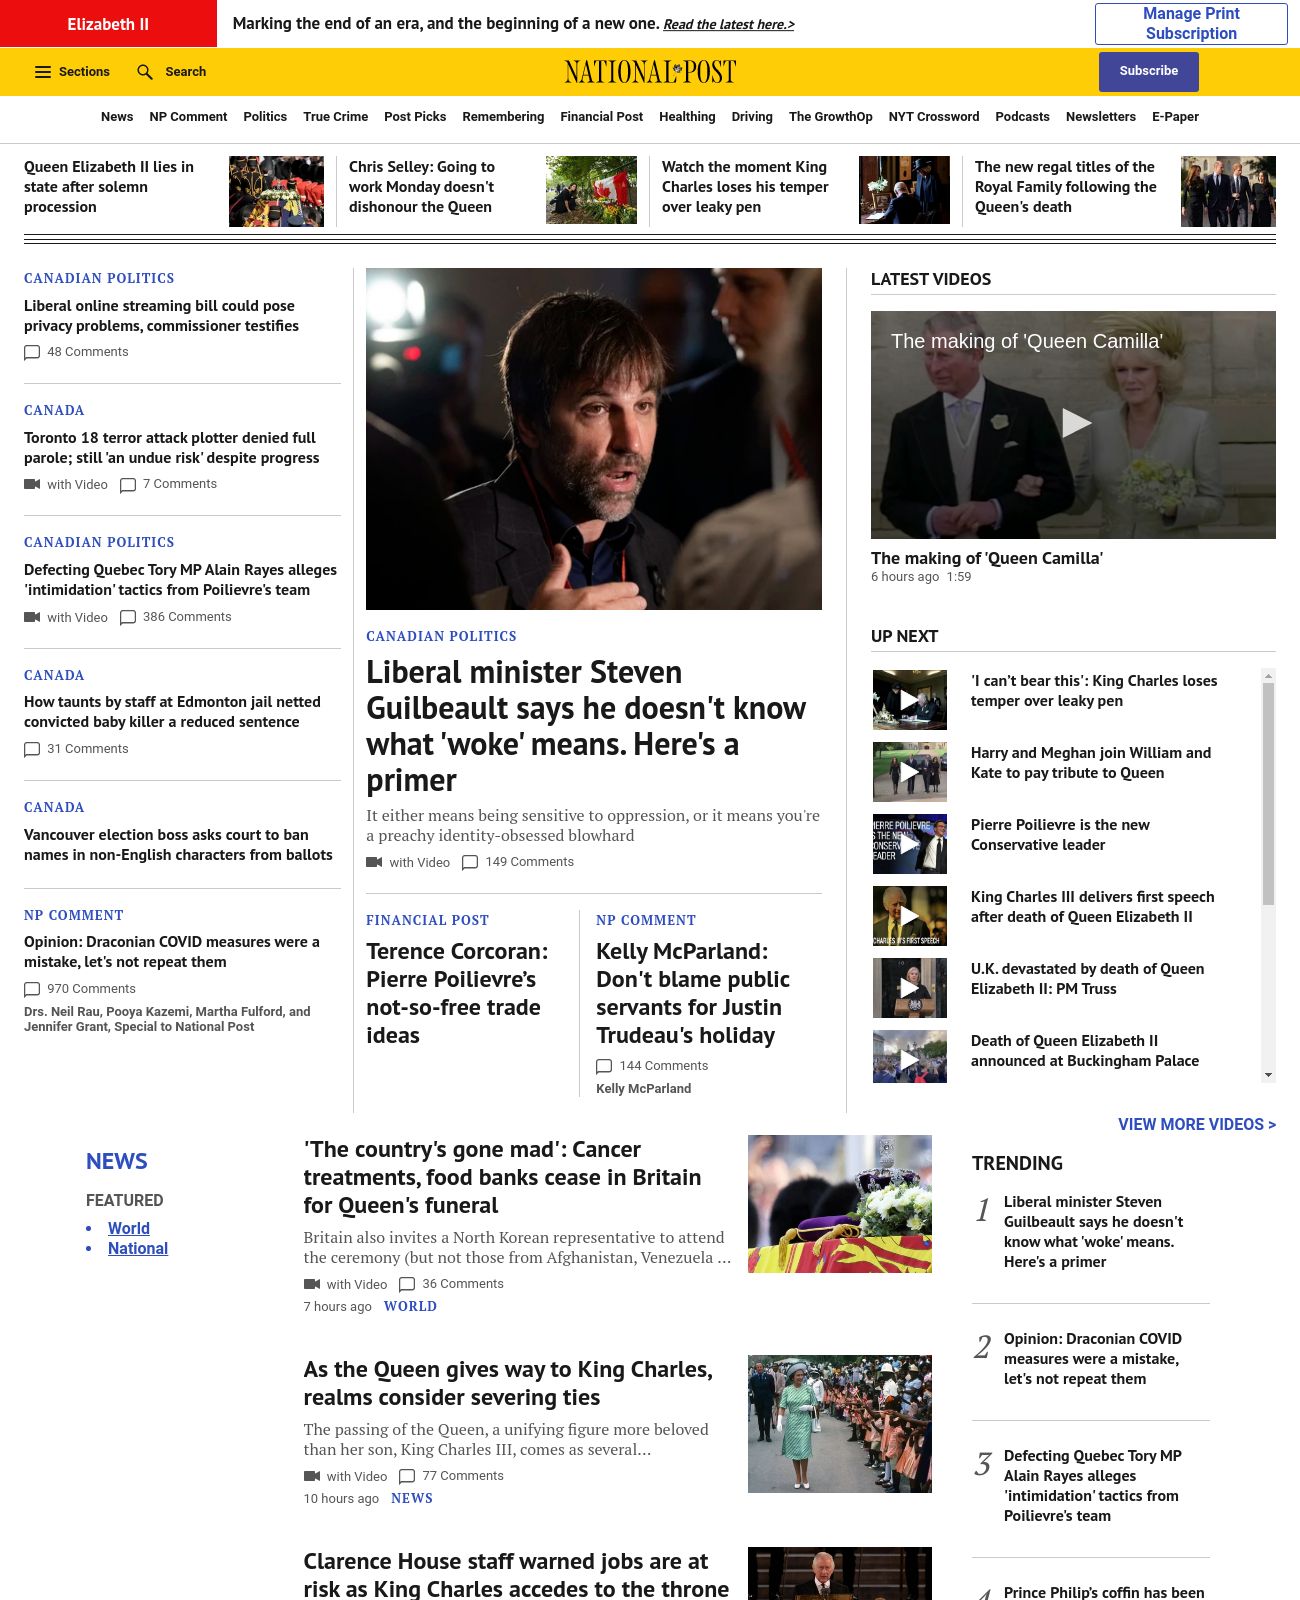 National Post at 2022-09-15 01:26:35-04:00 local time